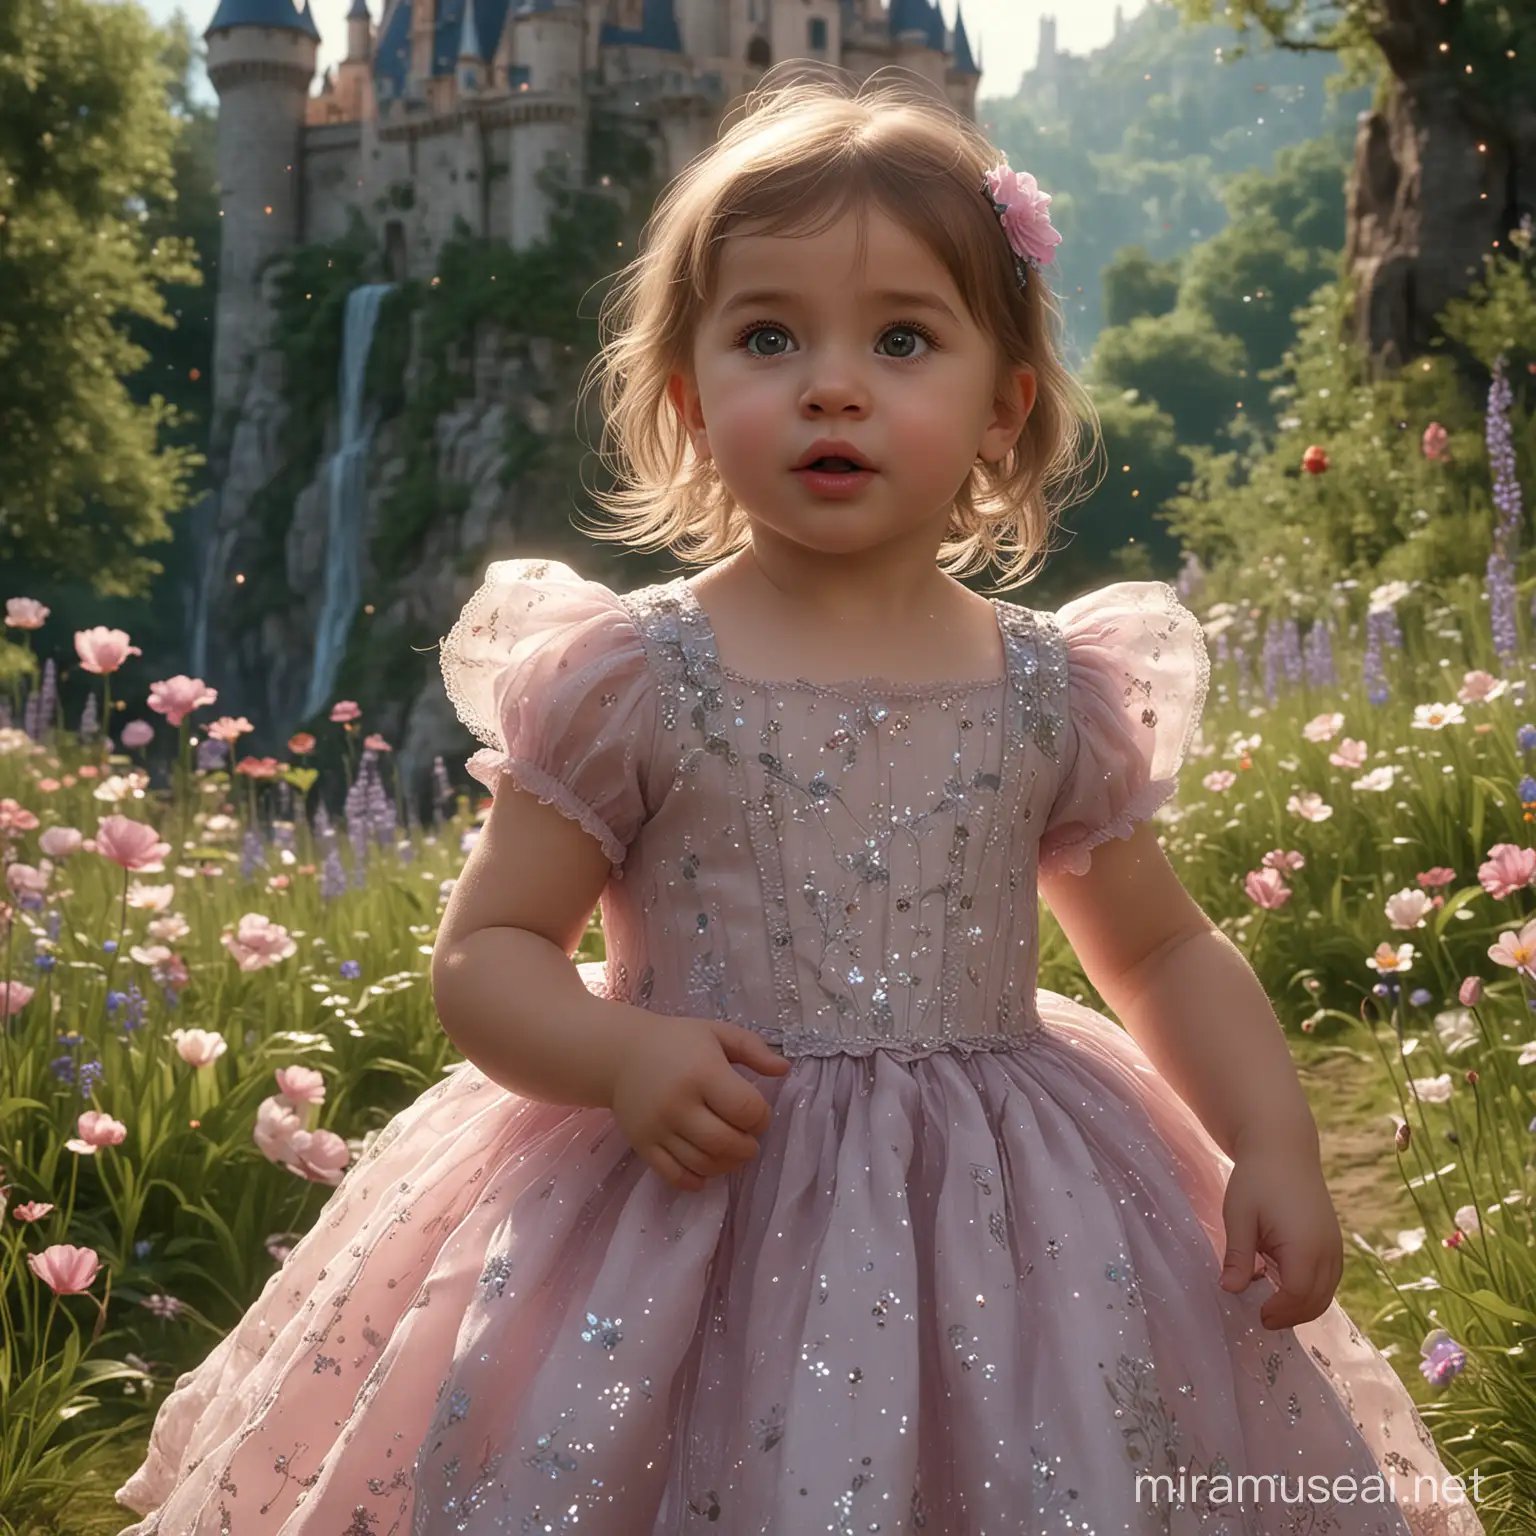 Adorable 2YearOld Girl in Magical Dress by Fairytale Forest